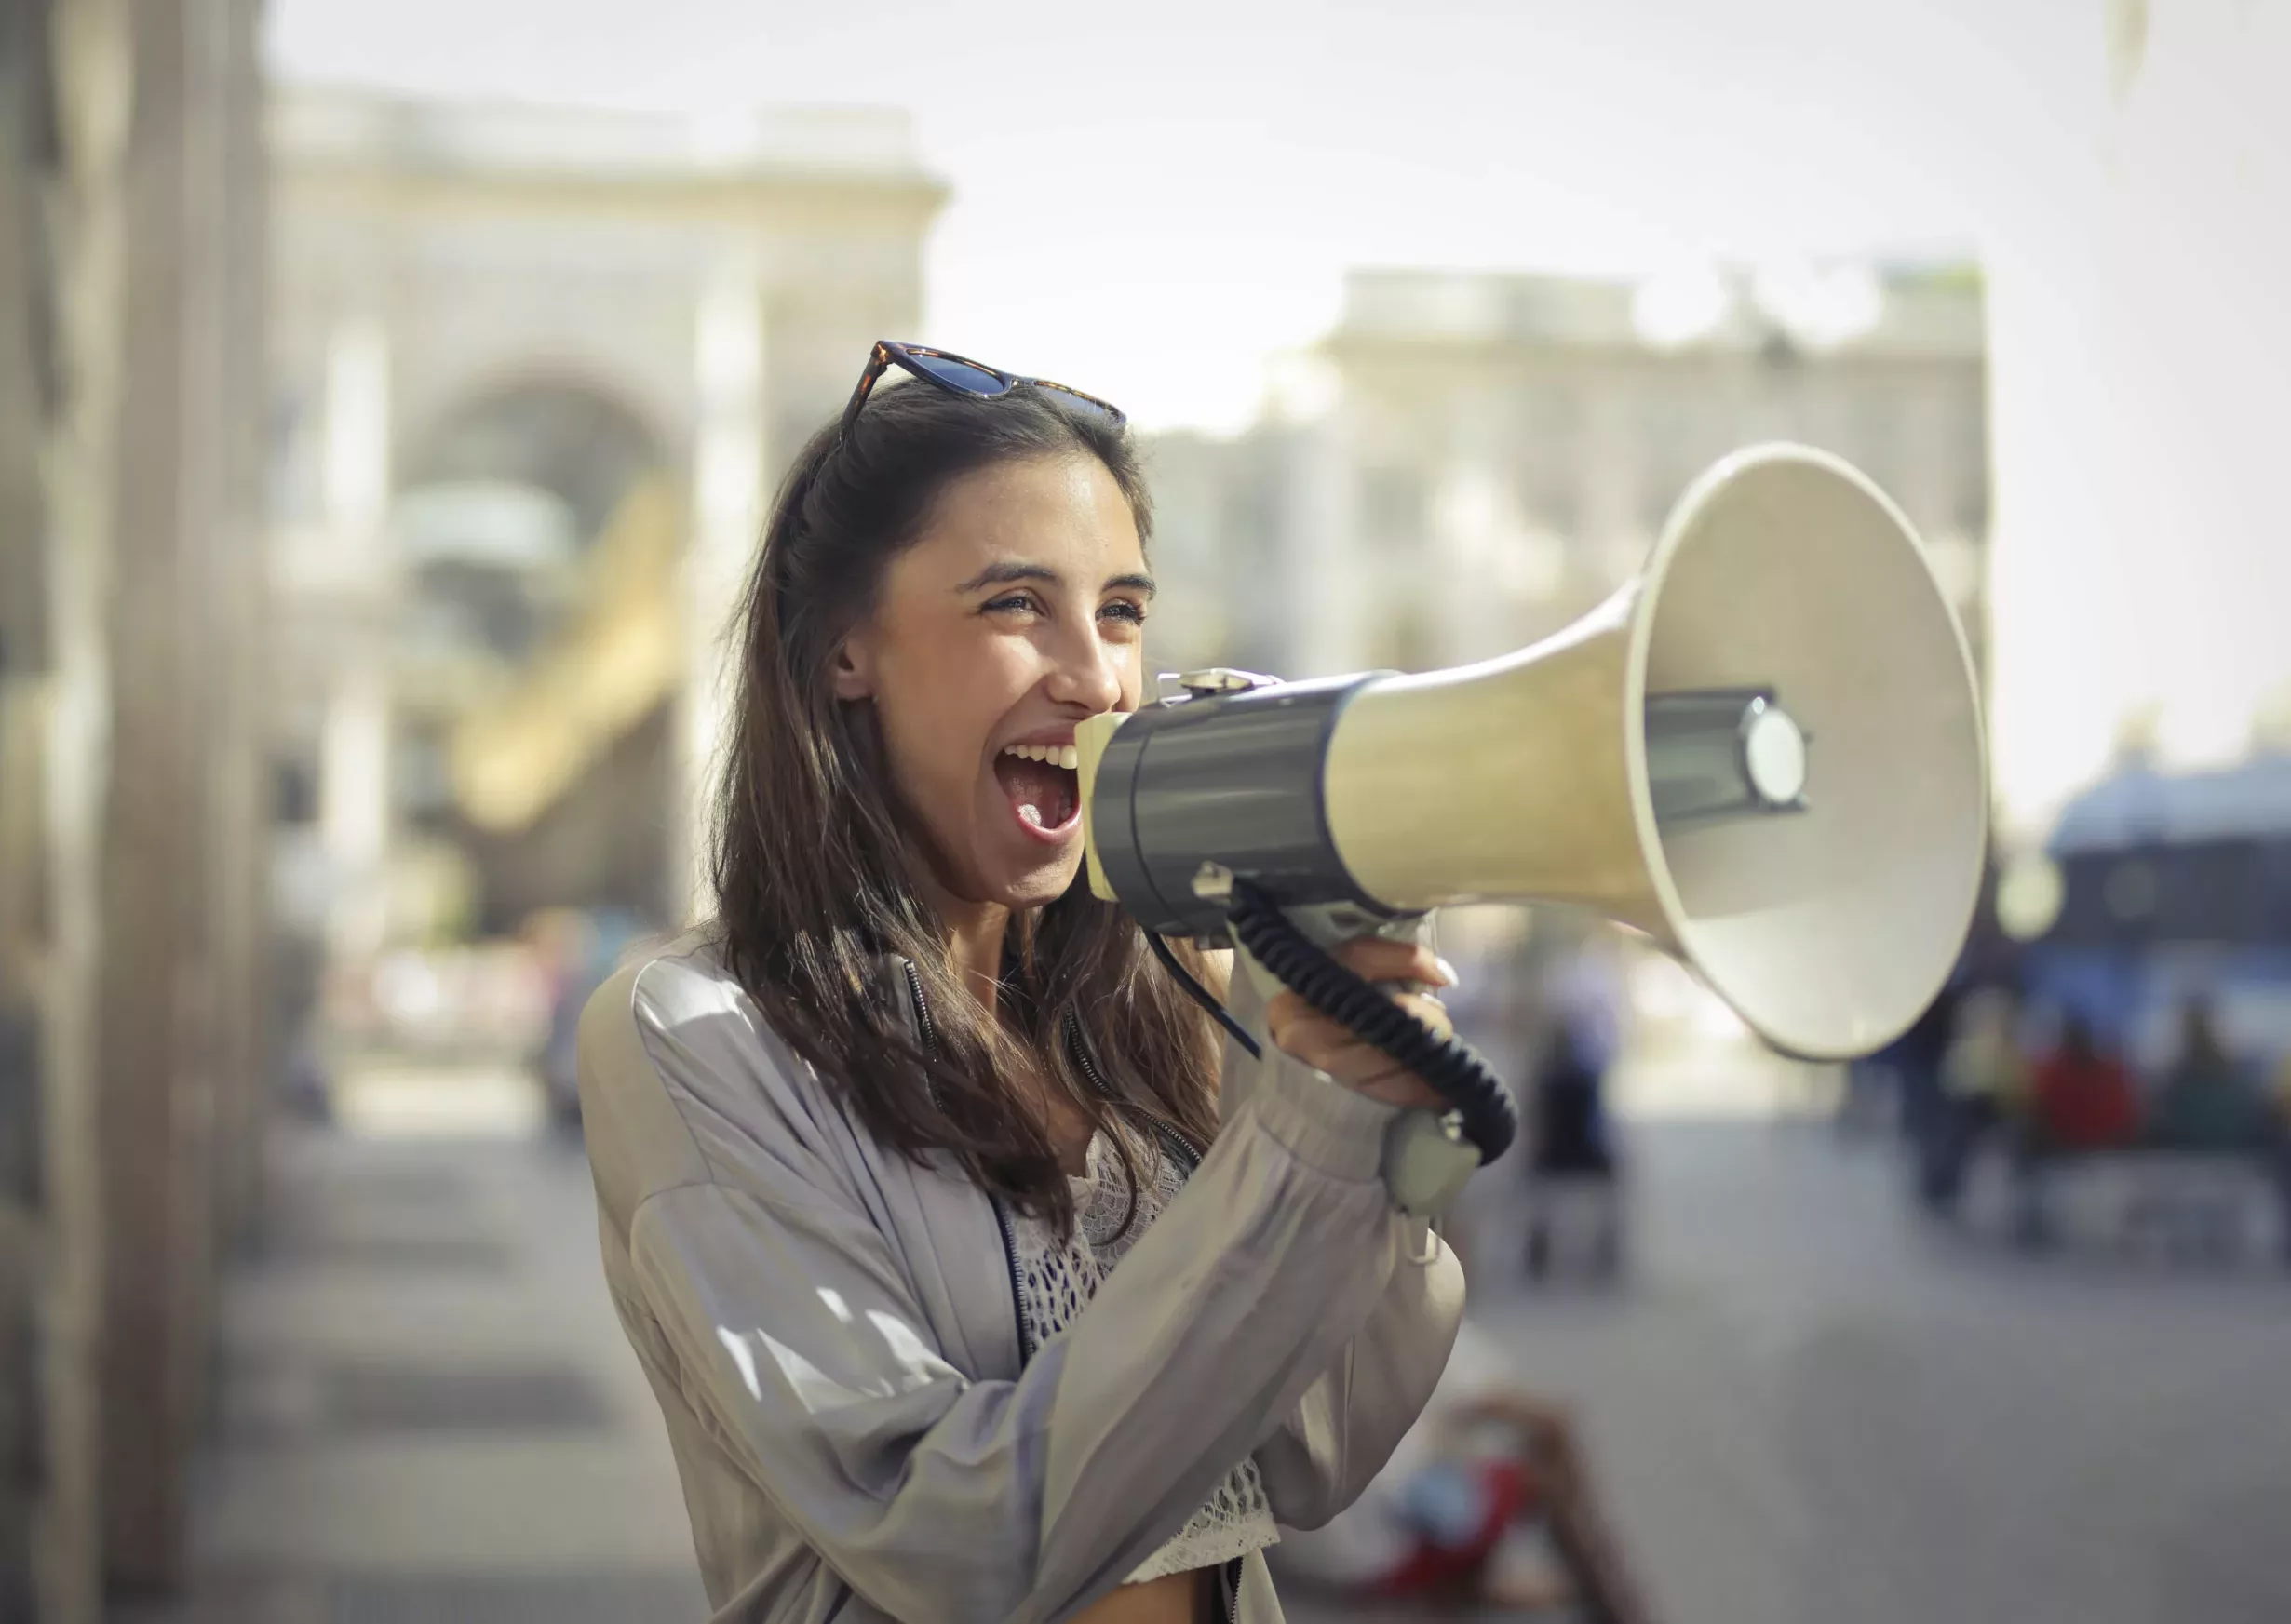 A woman with long dark hair wearing a beige jacket and sunglasses on her head is holding a bullhorn and smiling widely, conveying a sense of positivity and enthusiasm.